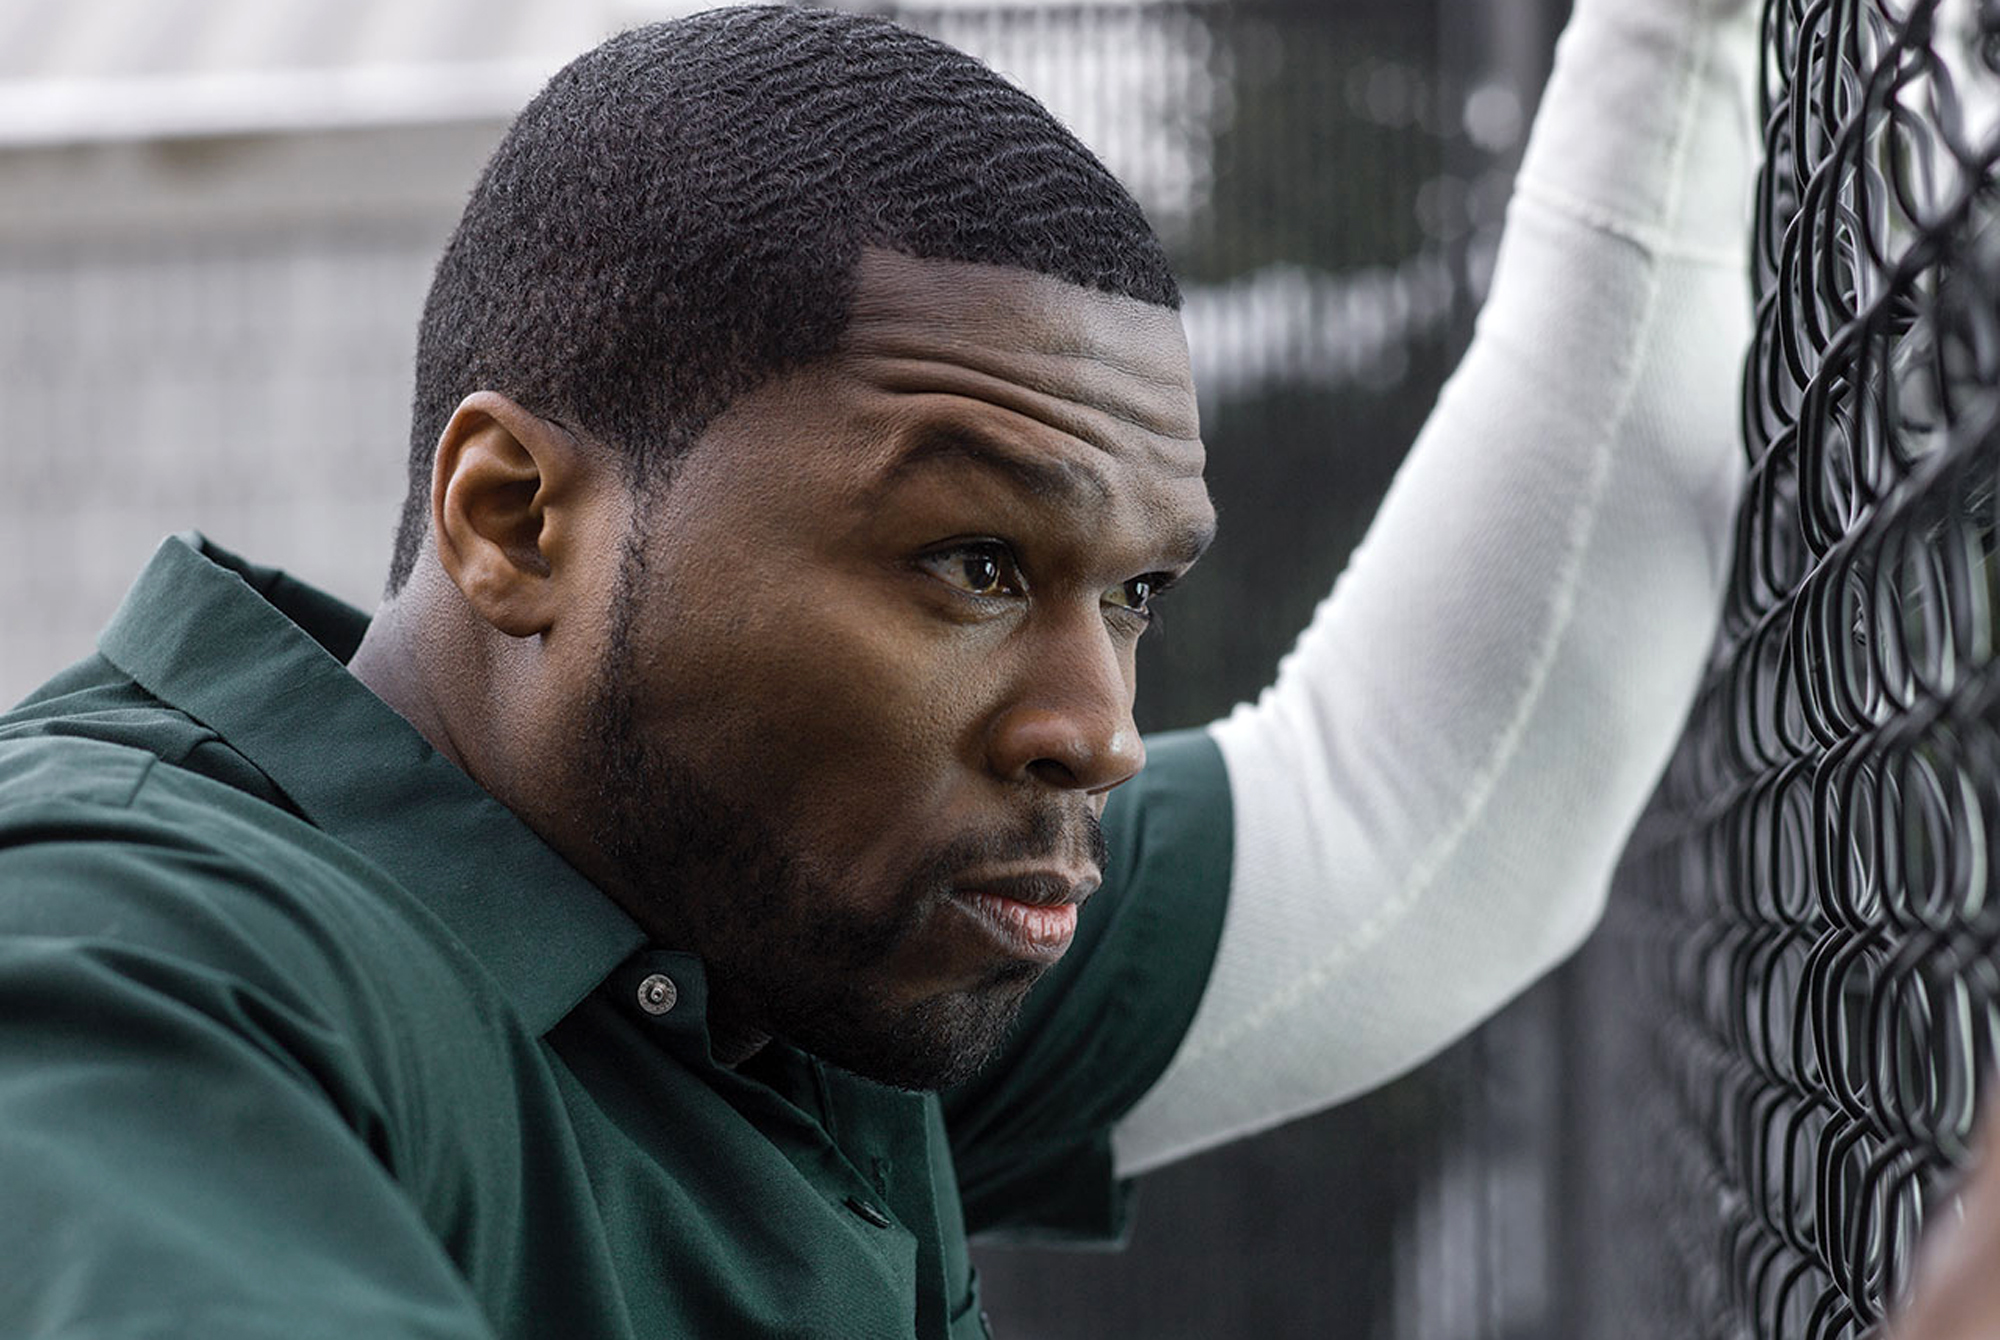 5 Facts You Need To Know About 50 Cent’s Starz Series “Power”